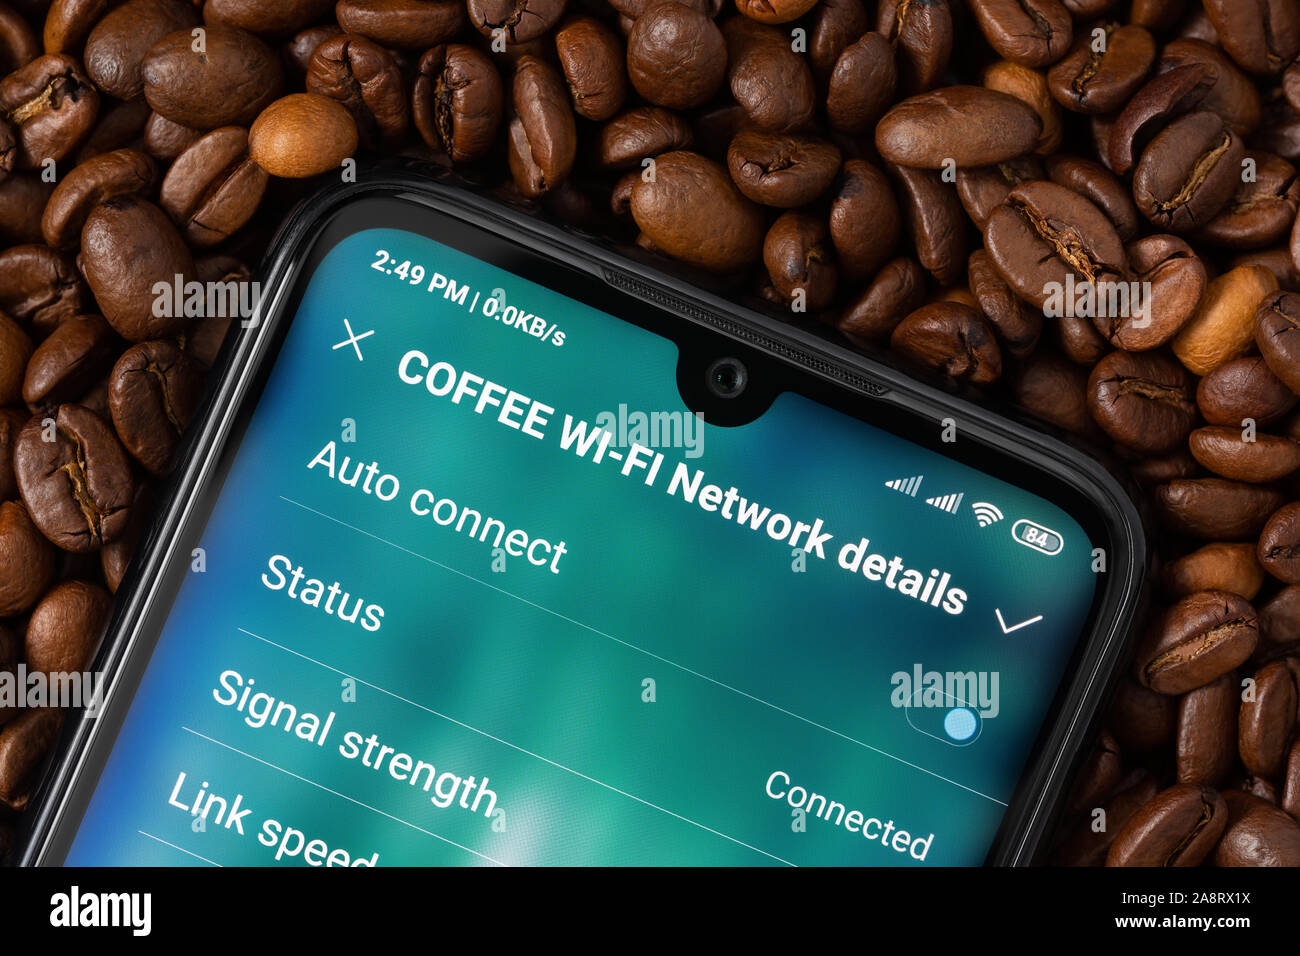 A smartphone with a screen for connecting to the Wi-Fi network 'Coffee' lies on coffee beans. Mobile internet access concept in cafe. Stock Photo